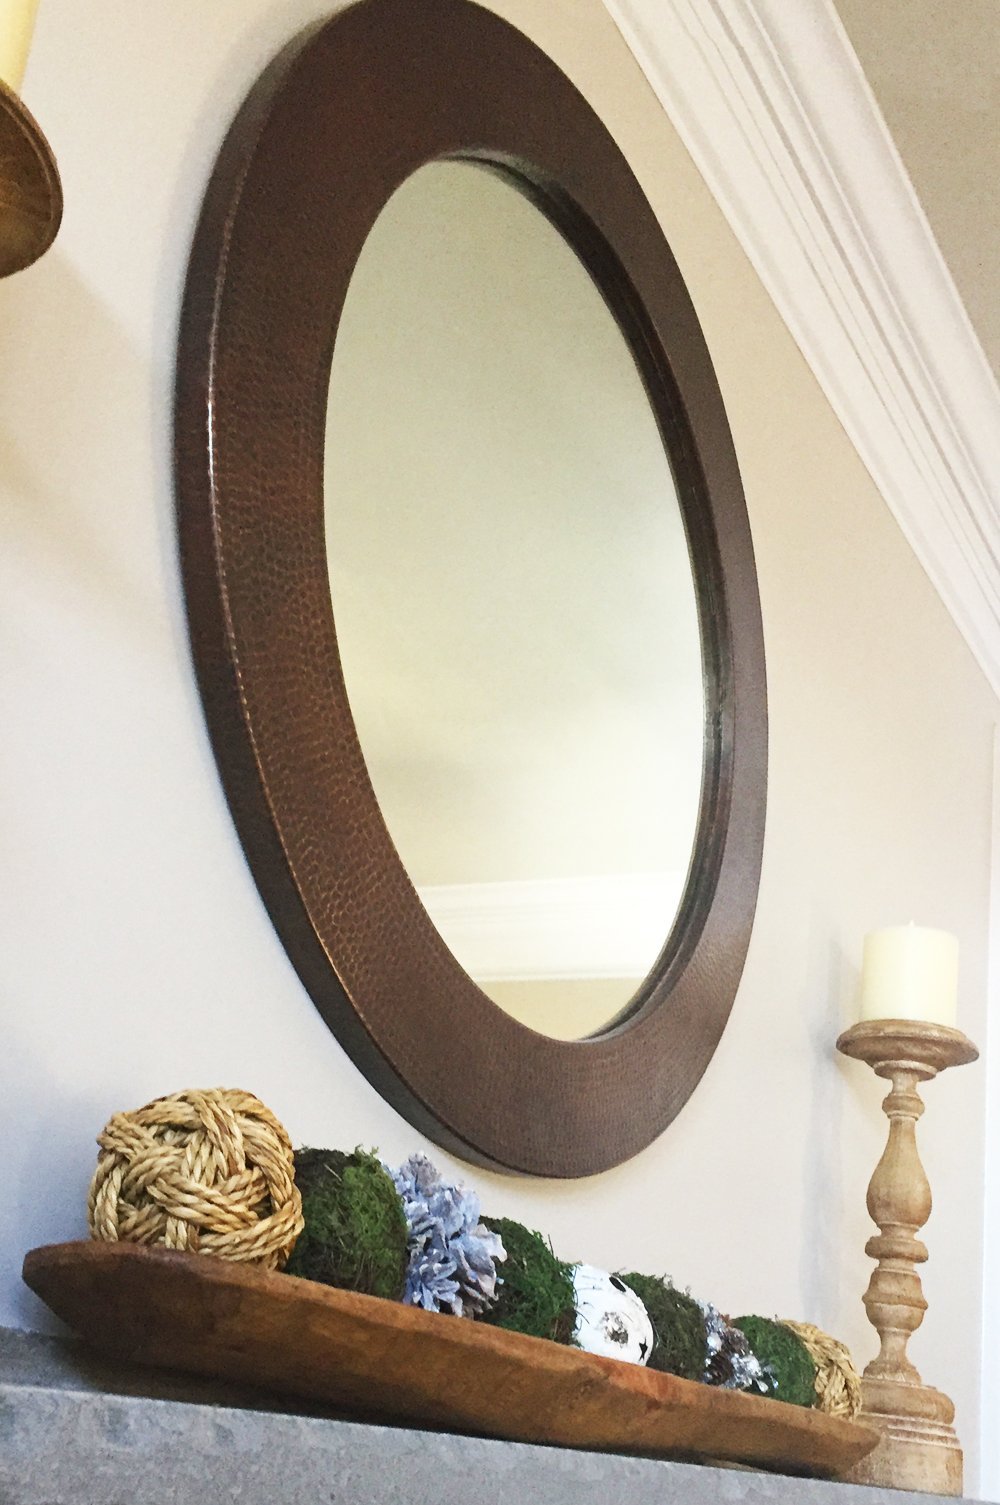 34" Round Hammered Copper Mirror above a mantle in a rustic home